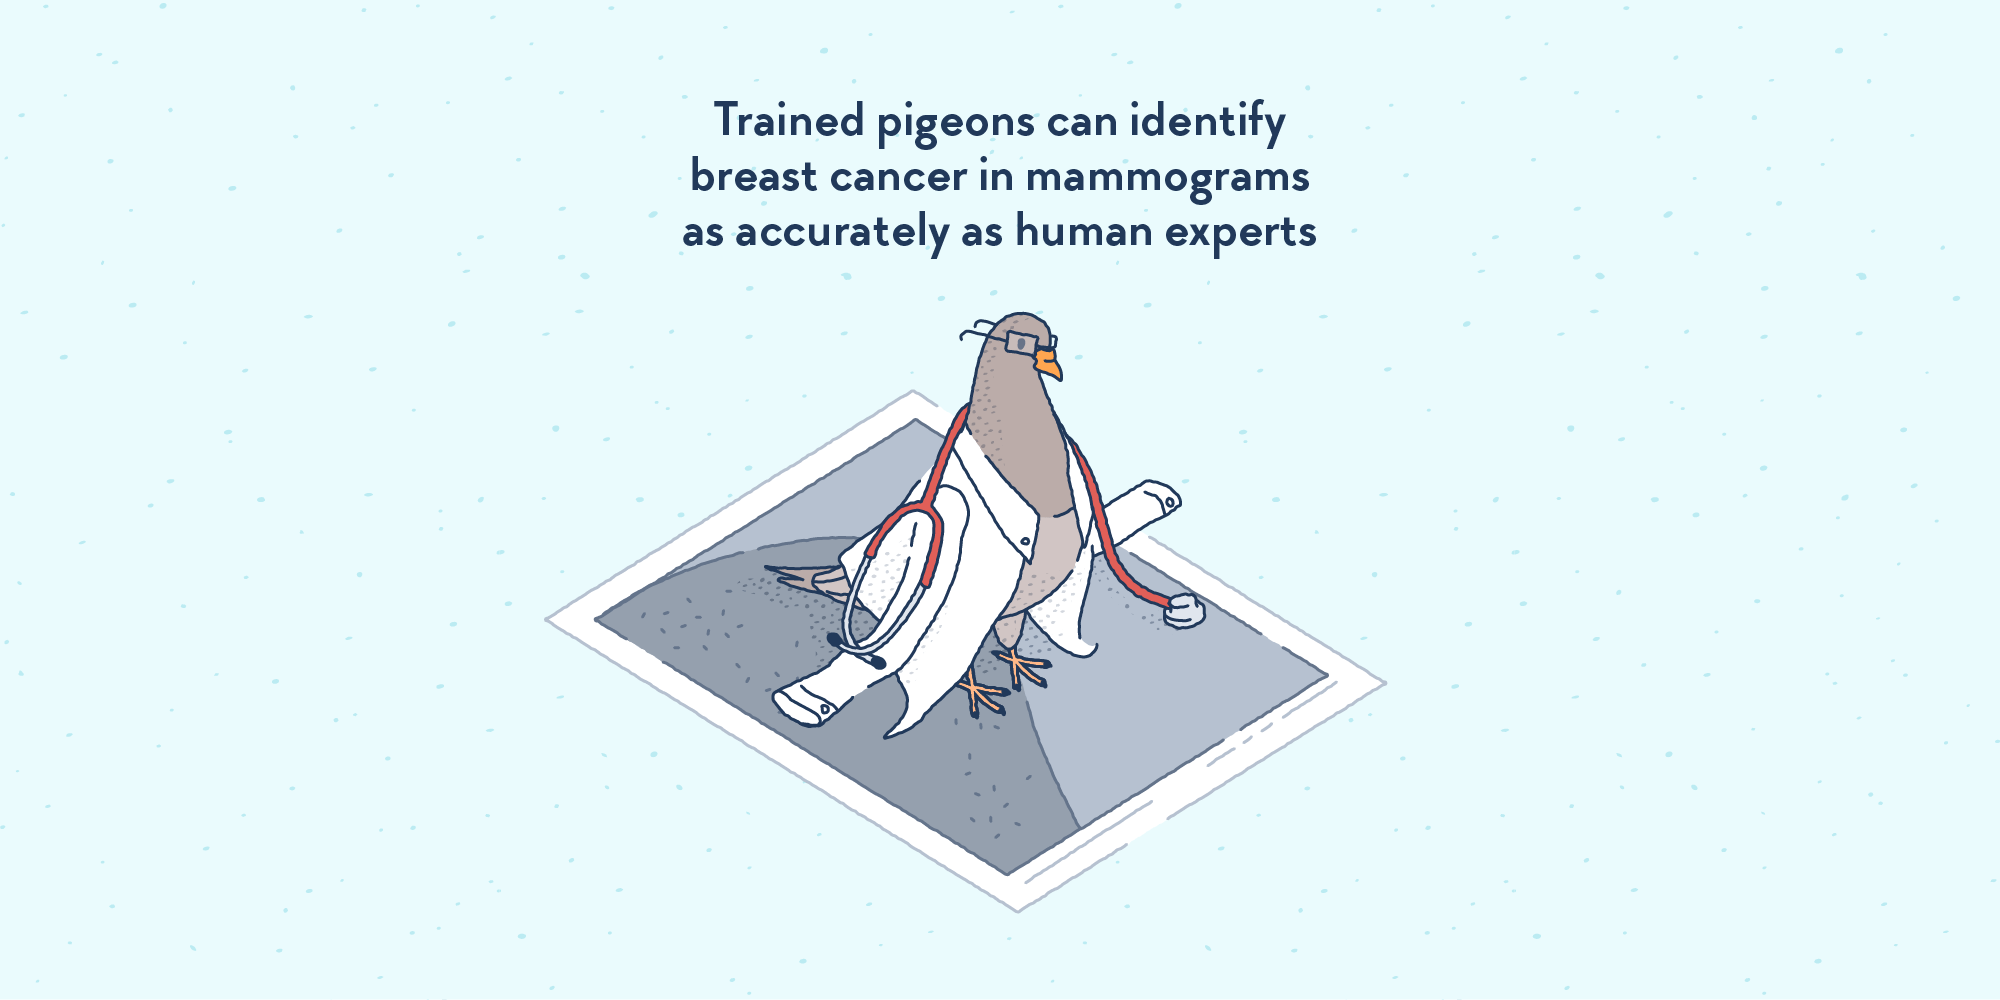 A pigeon wearing an oversized doctor’s coat and a stethoscope, standing on a mammogram.